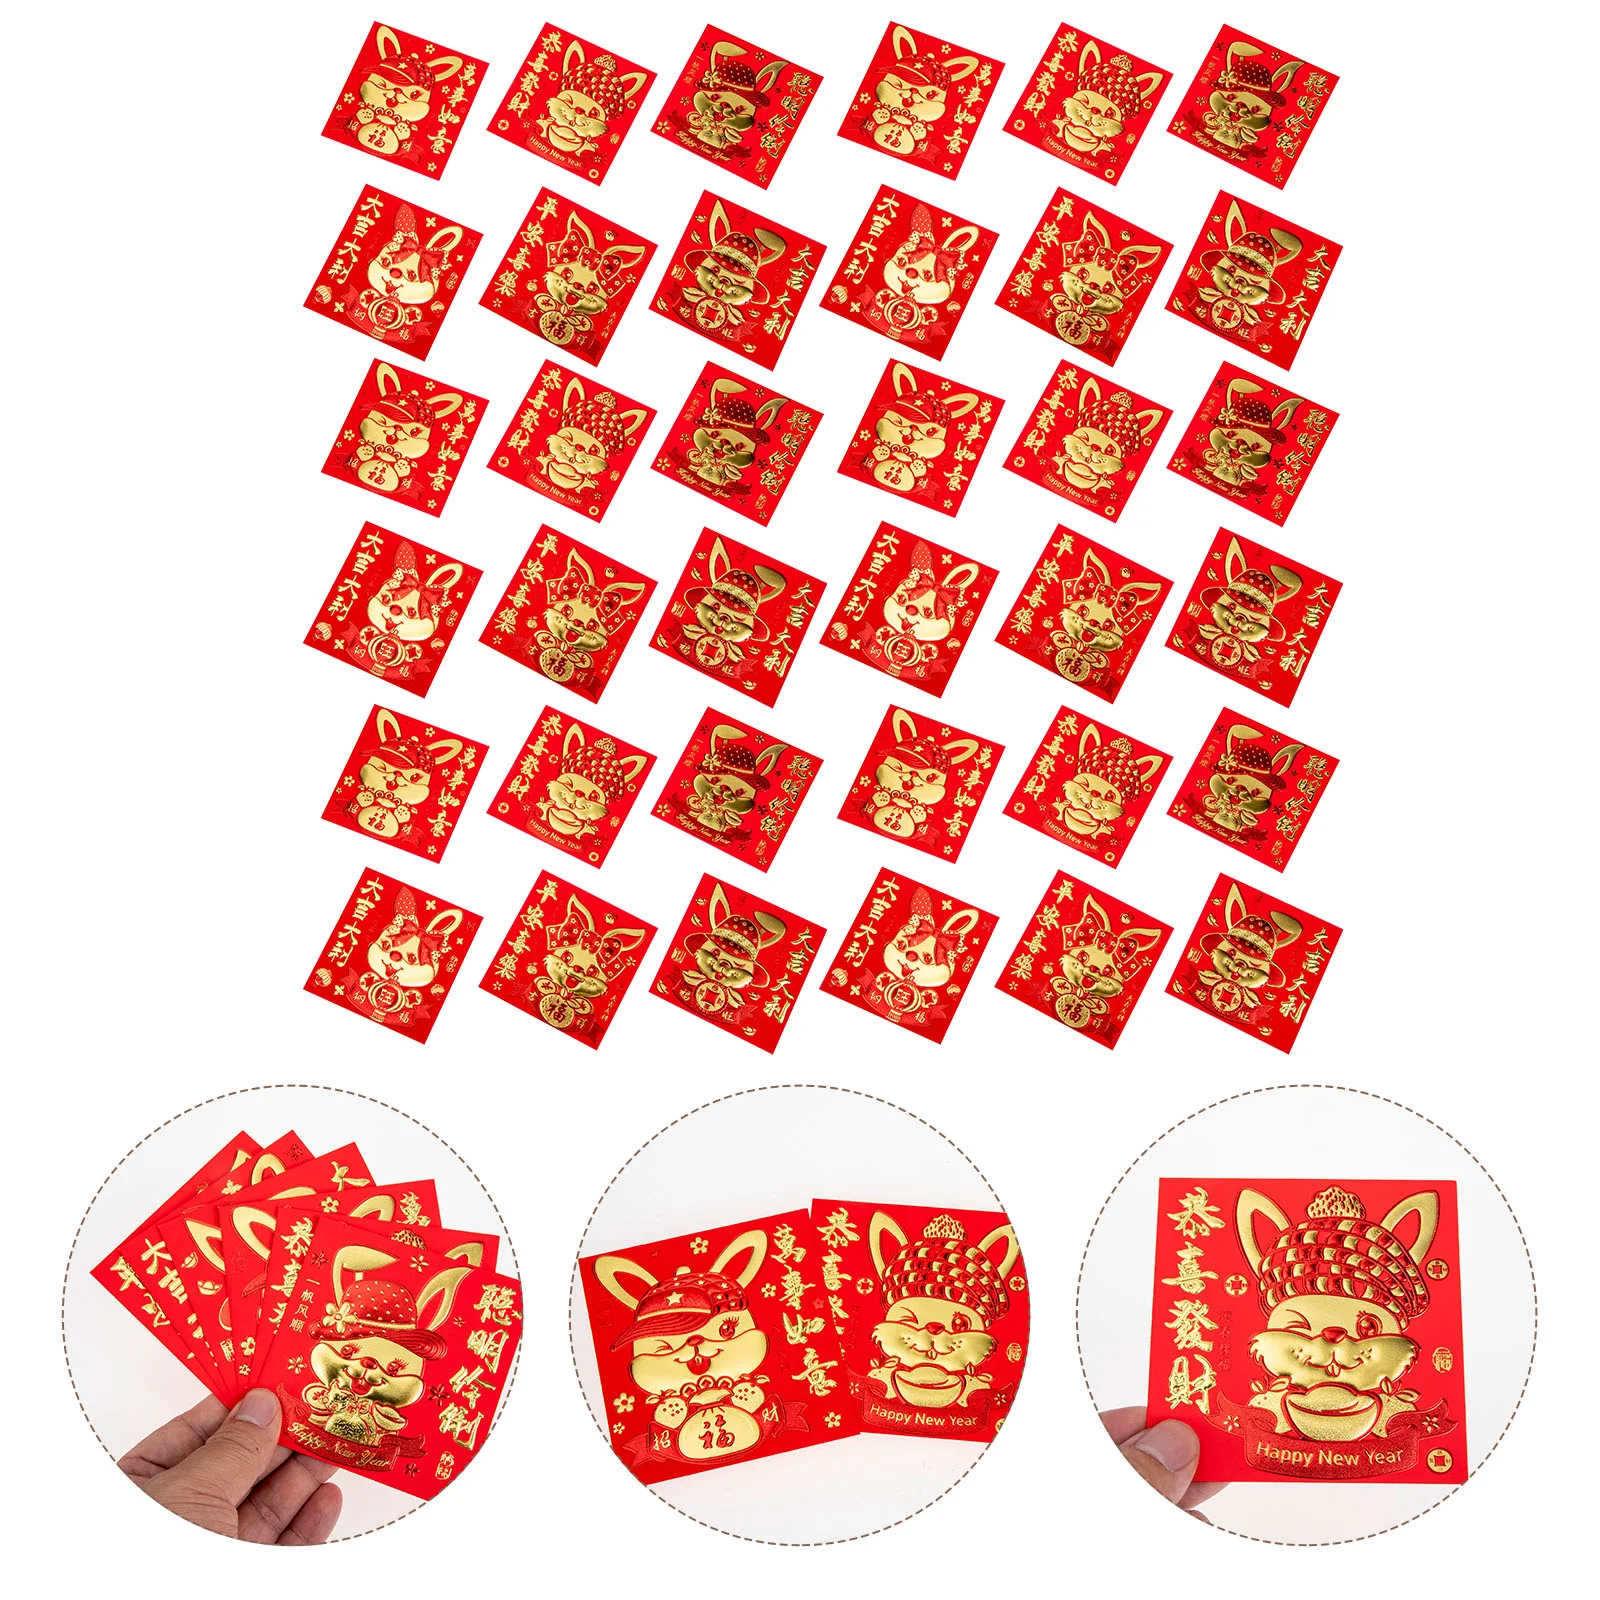 

Red Envelopes Money Year Chinese New Packet Envelope Packets Rabbit Zodiac Festival Spring Lucky Hong Bao Lunar Pocket Cash